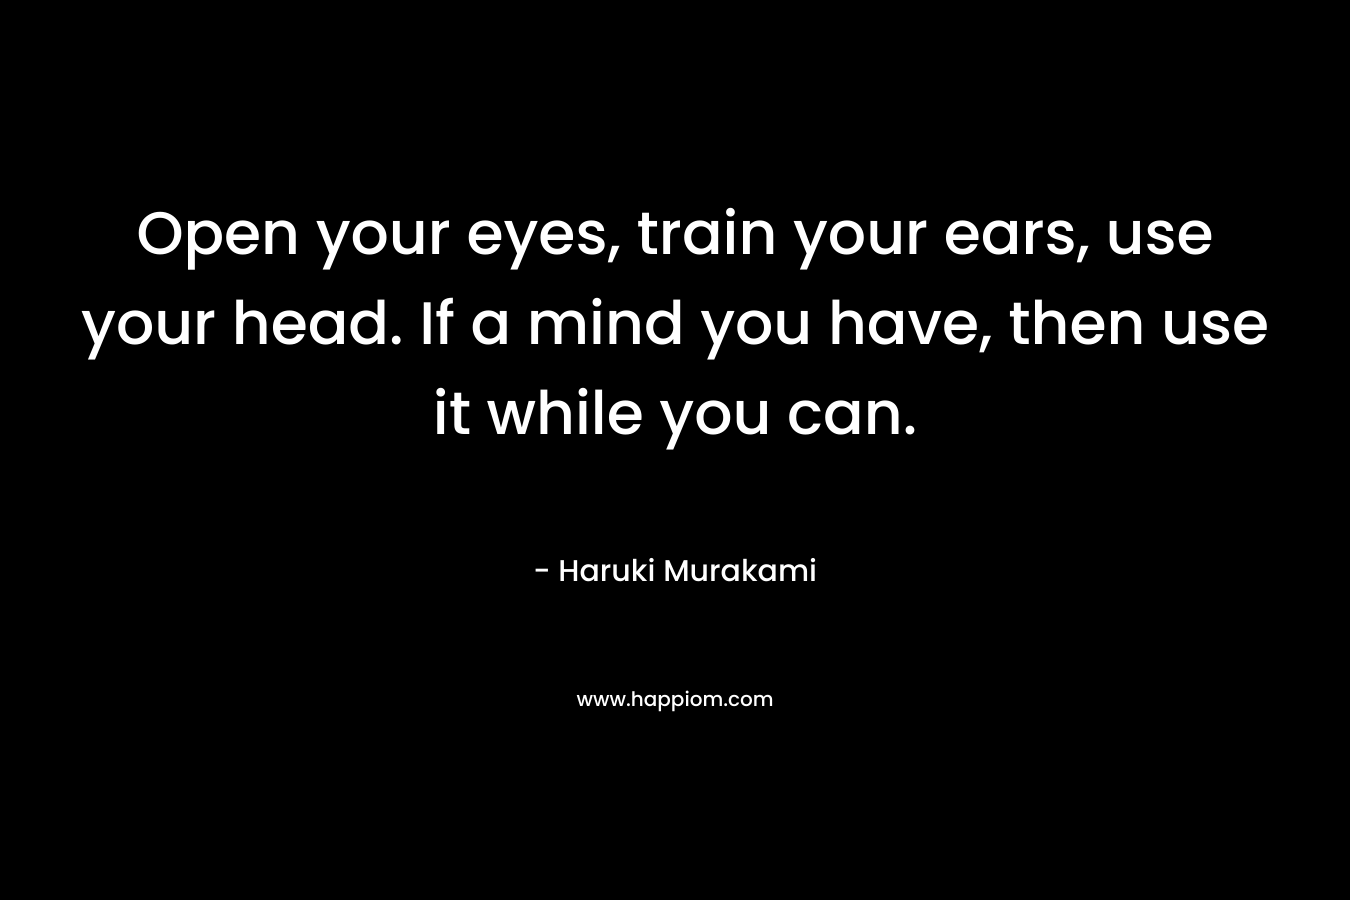 Open your eyes, train your ears, use your head. If a mind you have, then use it while you can.